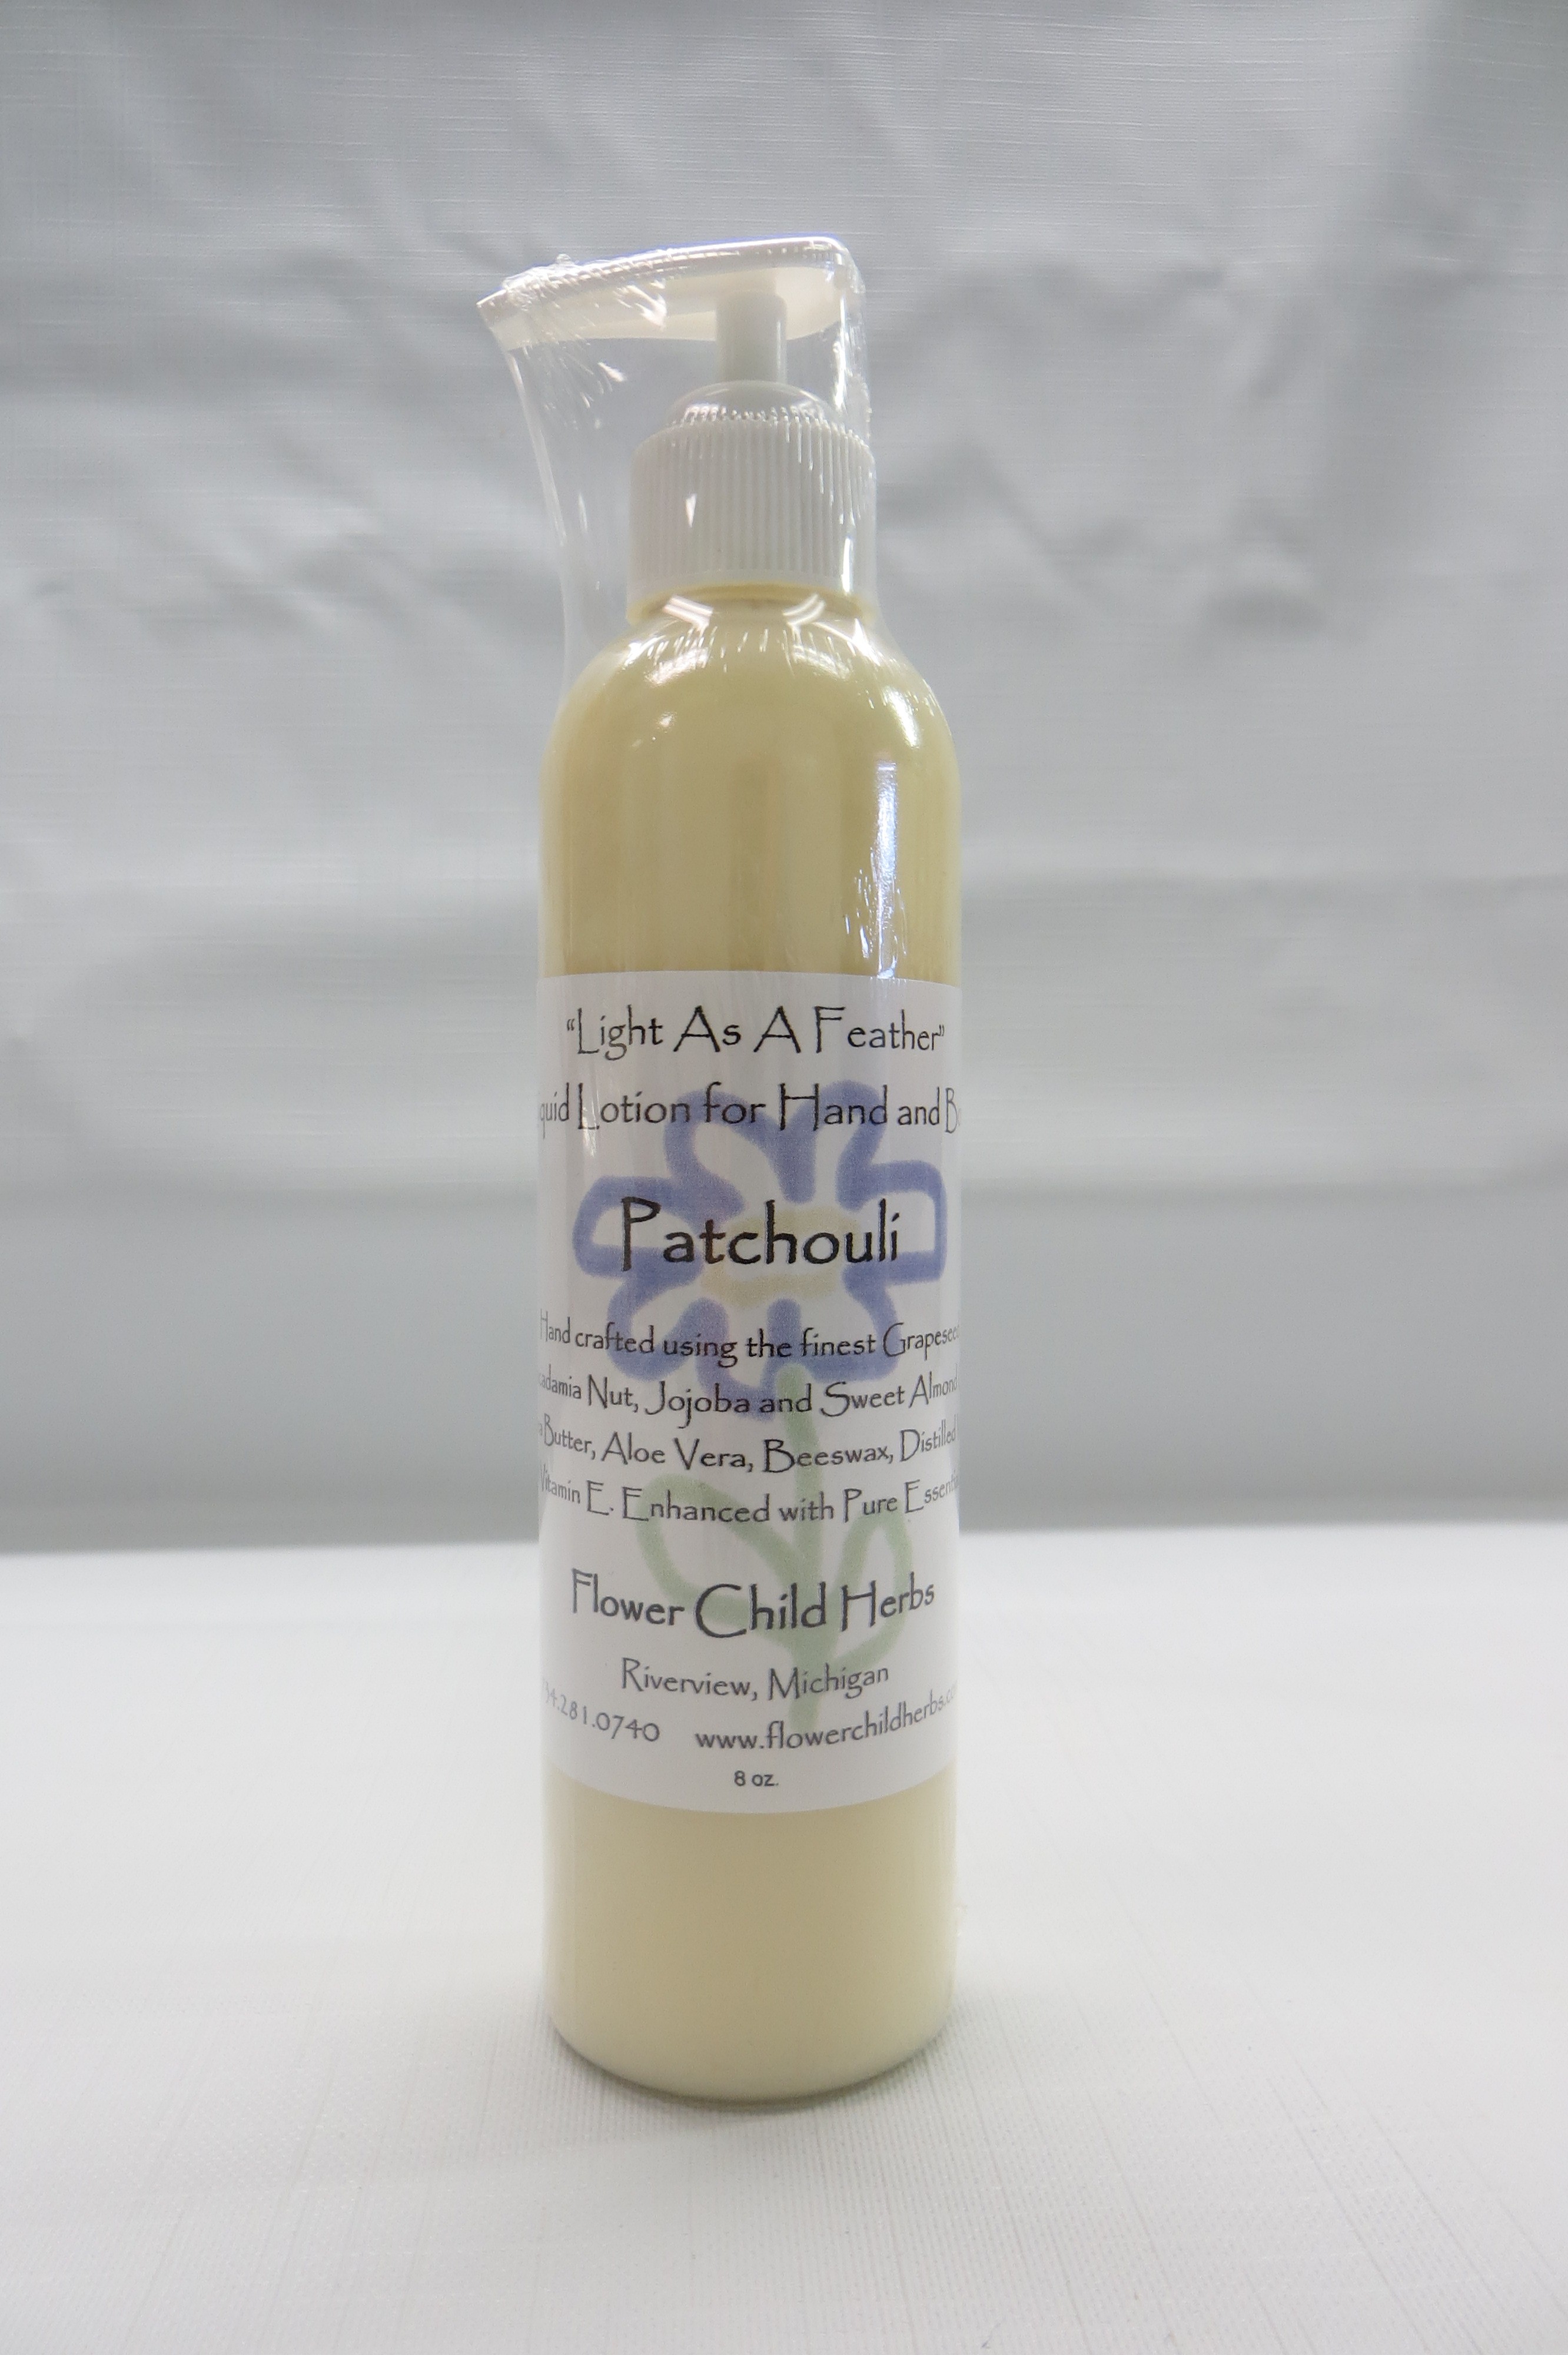 Patchouli "Light as a Feather" Lotion